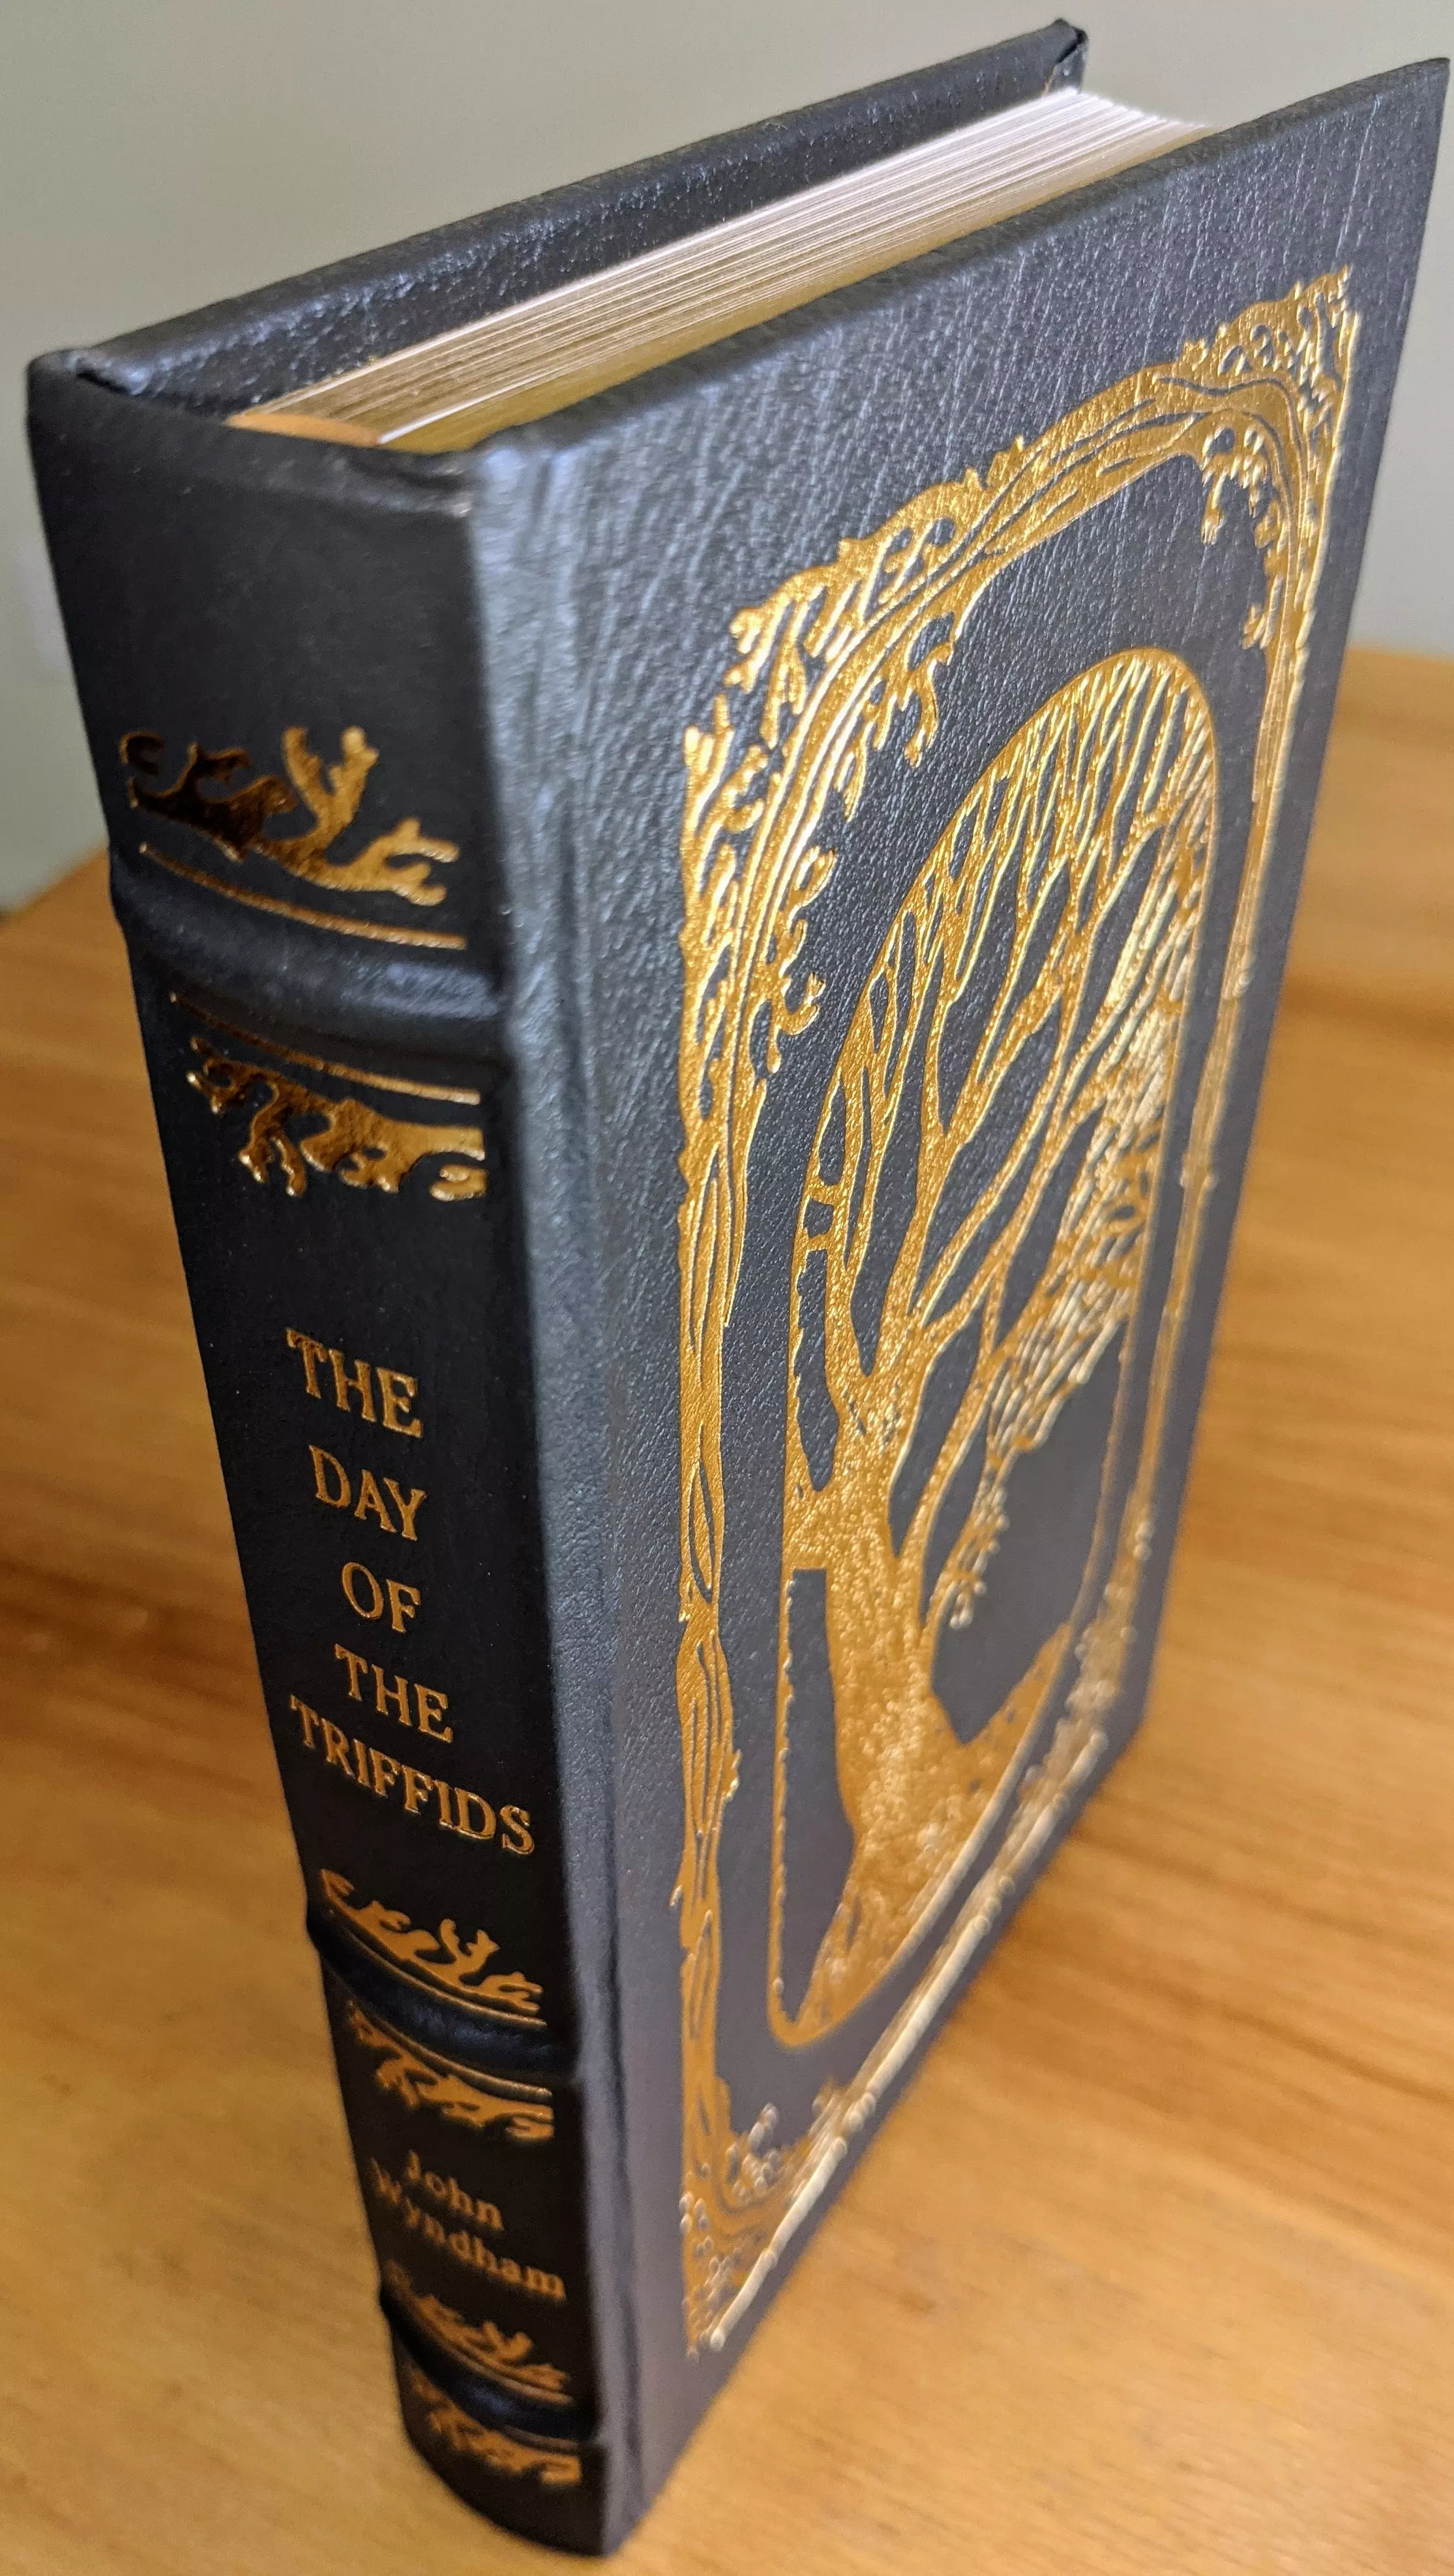 Stunning Blue Leather Bound hardback book with hubbed spine, cover artwork in 22kt gold, printed on archival paper with gold gilded edges, smyth sewing & concealed muslin joints
	  - original artwork by Richard Powers